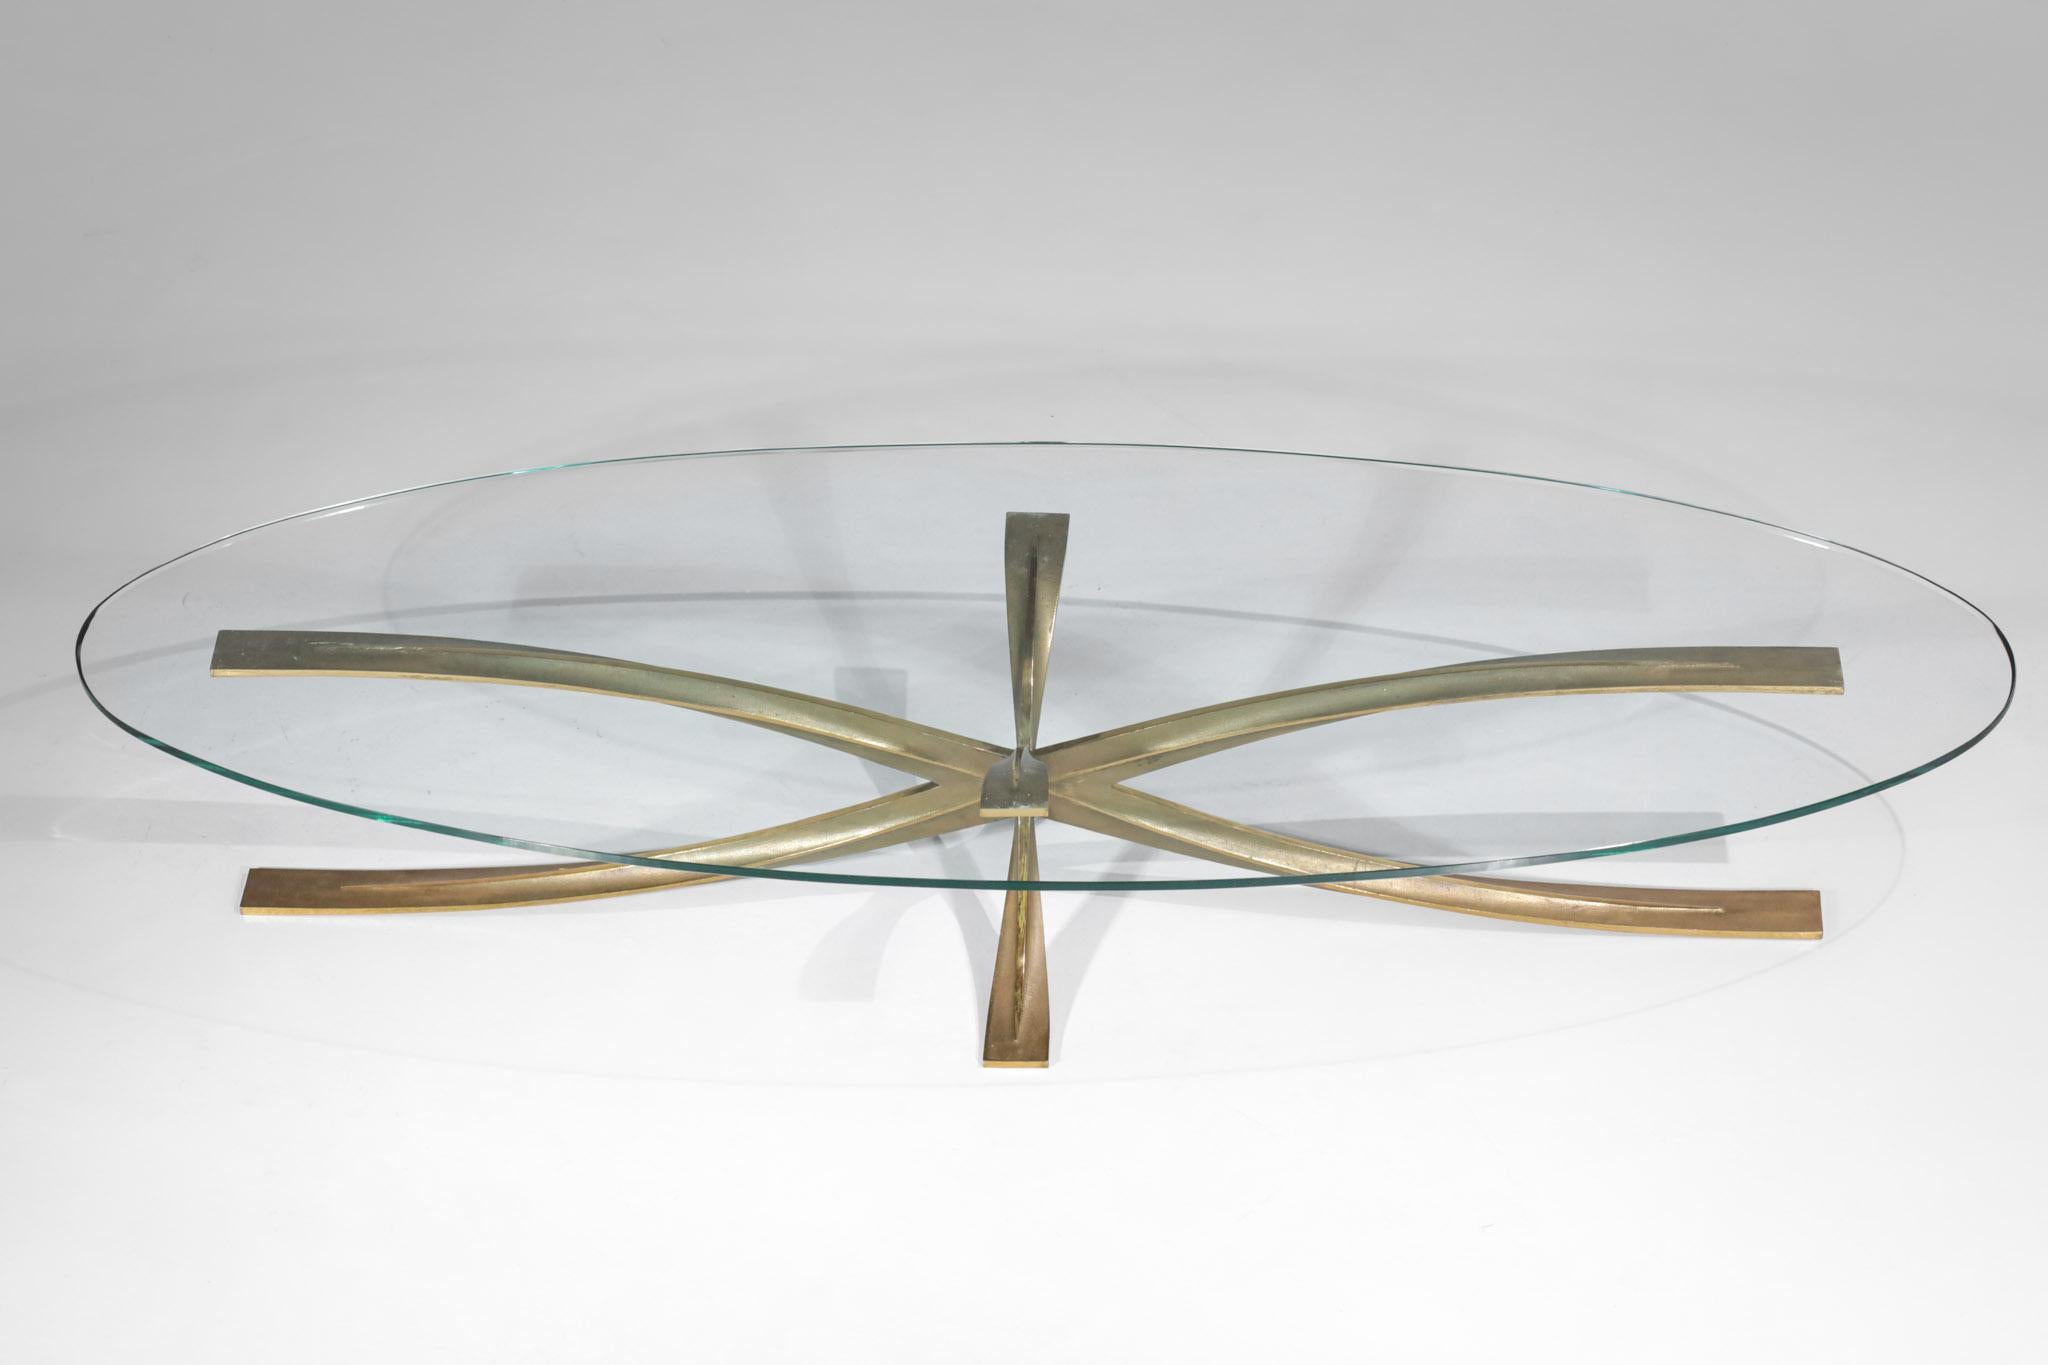 Large Michel Mangematin Coffee Table in Gilt Bronze and Oval Glass 1960's Design For Sale 9